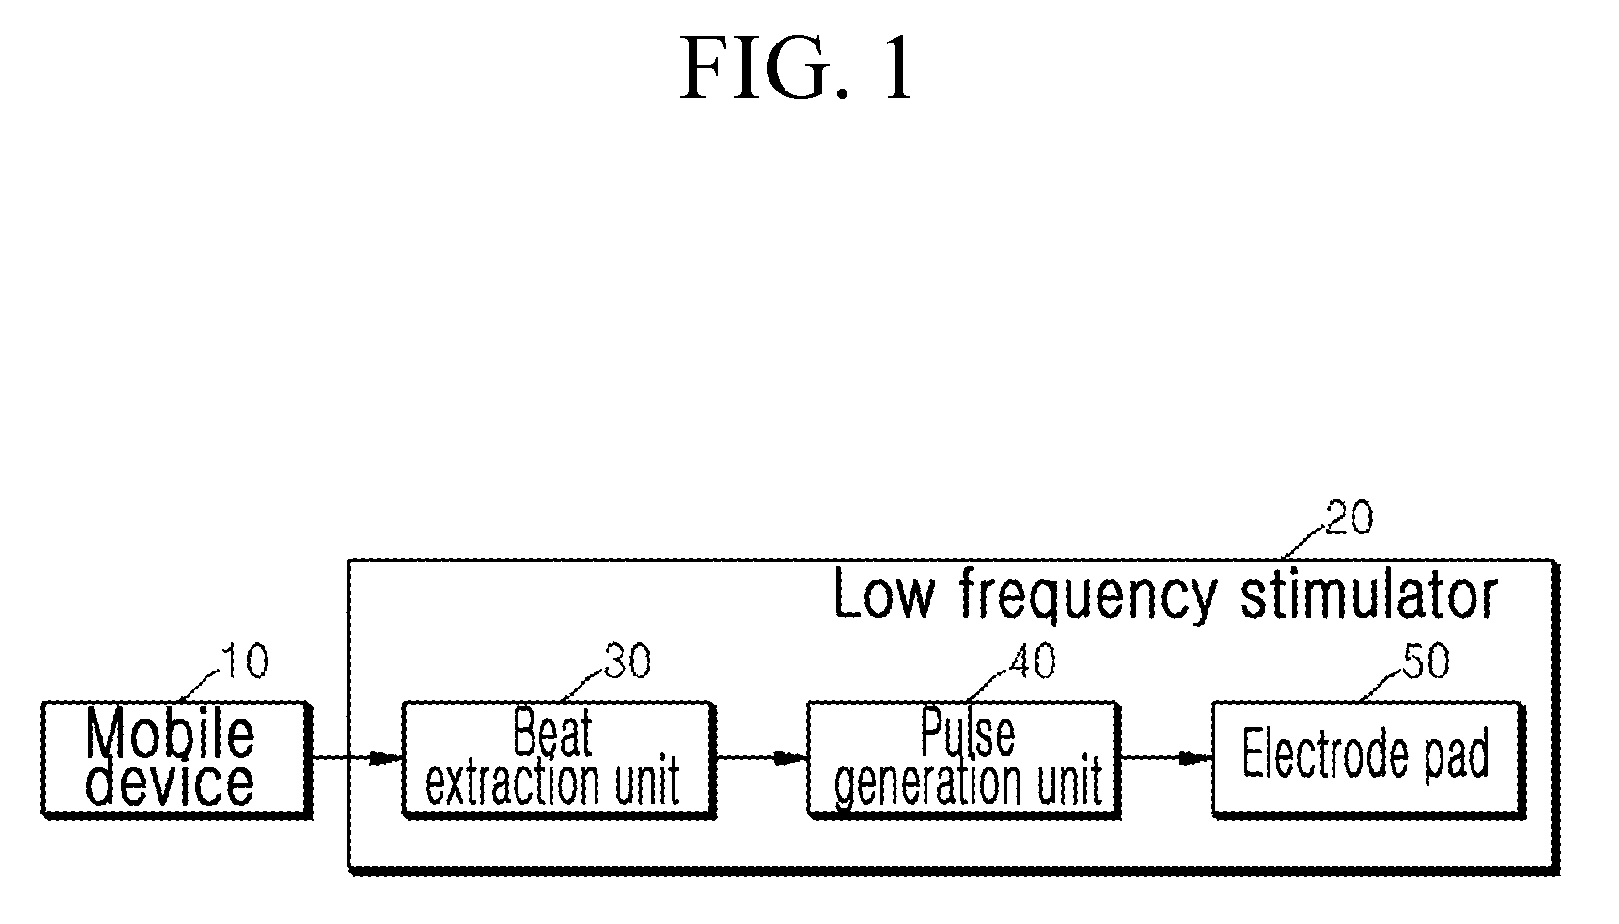 Low frequency stimulator using music and diet system including low frequency stimulator